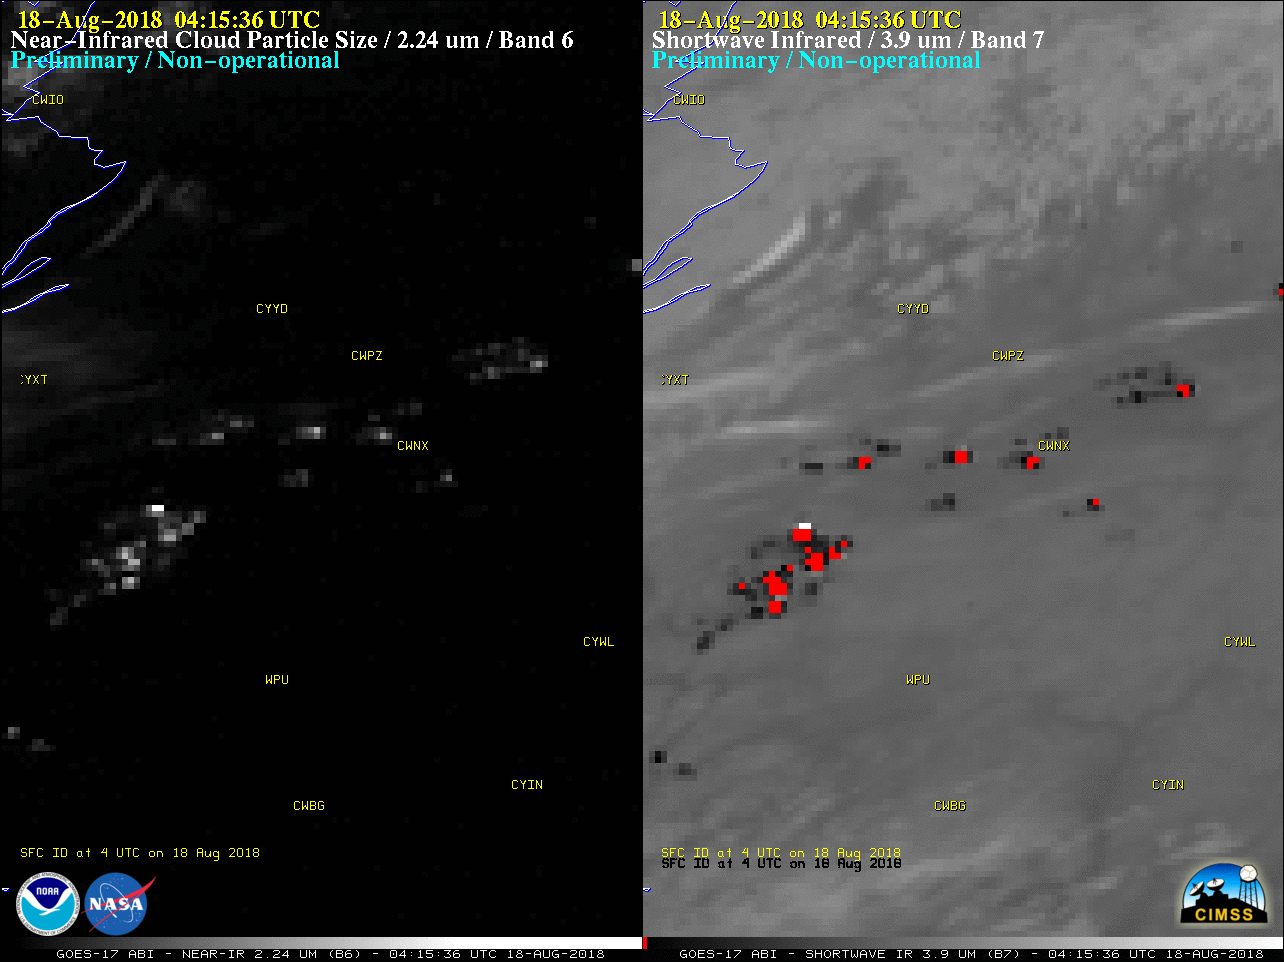 GOES-17 Near-Infrared 